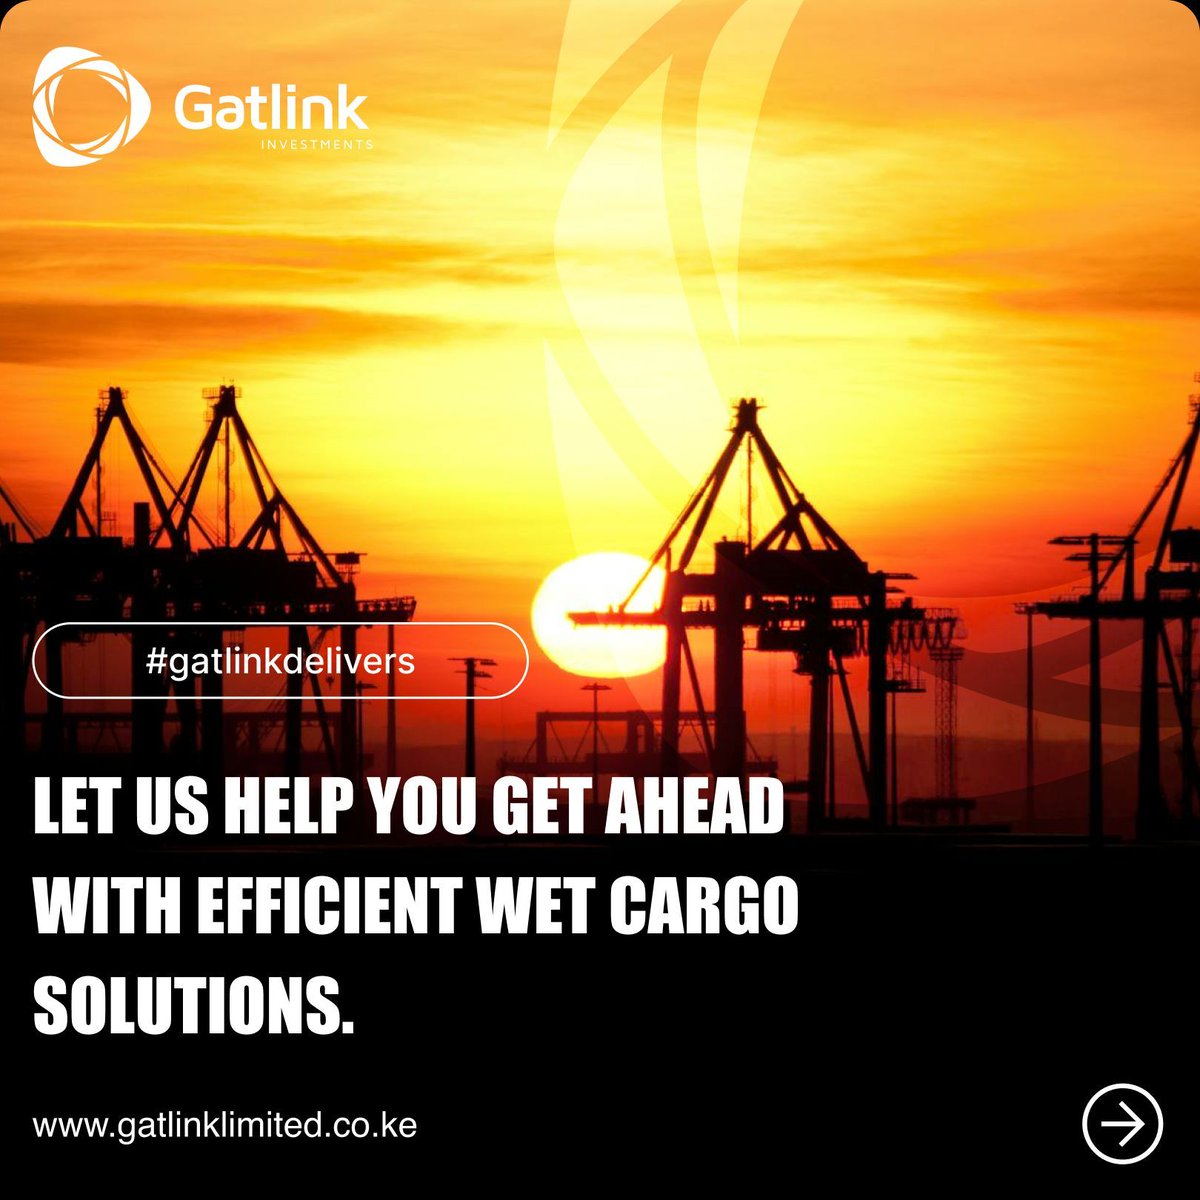 Every business has its strength, our strength is in the oil industry. Clearing, forwarding, and warehousing of petroleum products in compliance with East African customs law, rules, and regulations.

#gatlinkinvestments #seacargoshipping #freightservices #kenya #rwanda #drcongo